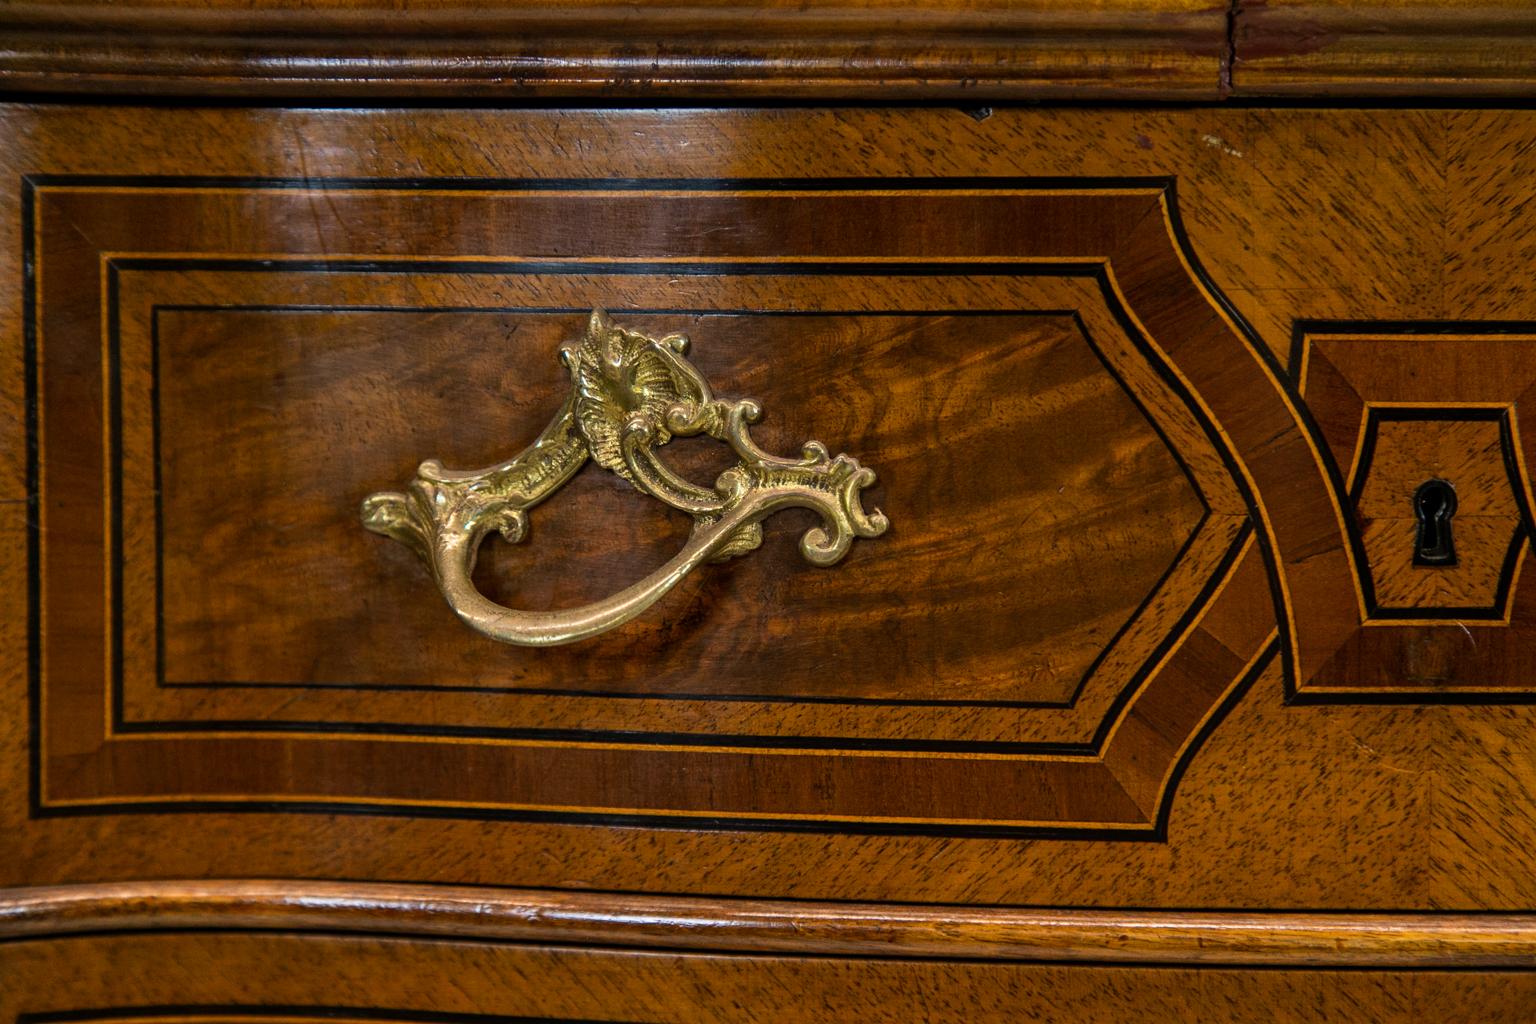 French inlaid serpentine two-drawer table having bookmatched burl walnut with inlaid satinwood and rosewood star. It has interlacing cross bandings made of ebony, boxwood, and fruitwood. It is serpentine on all four finished sides and has carved